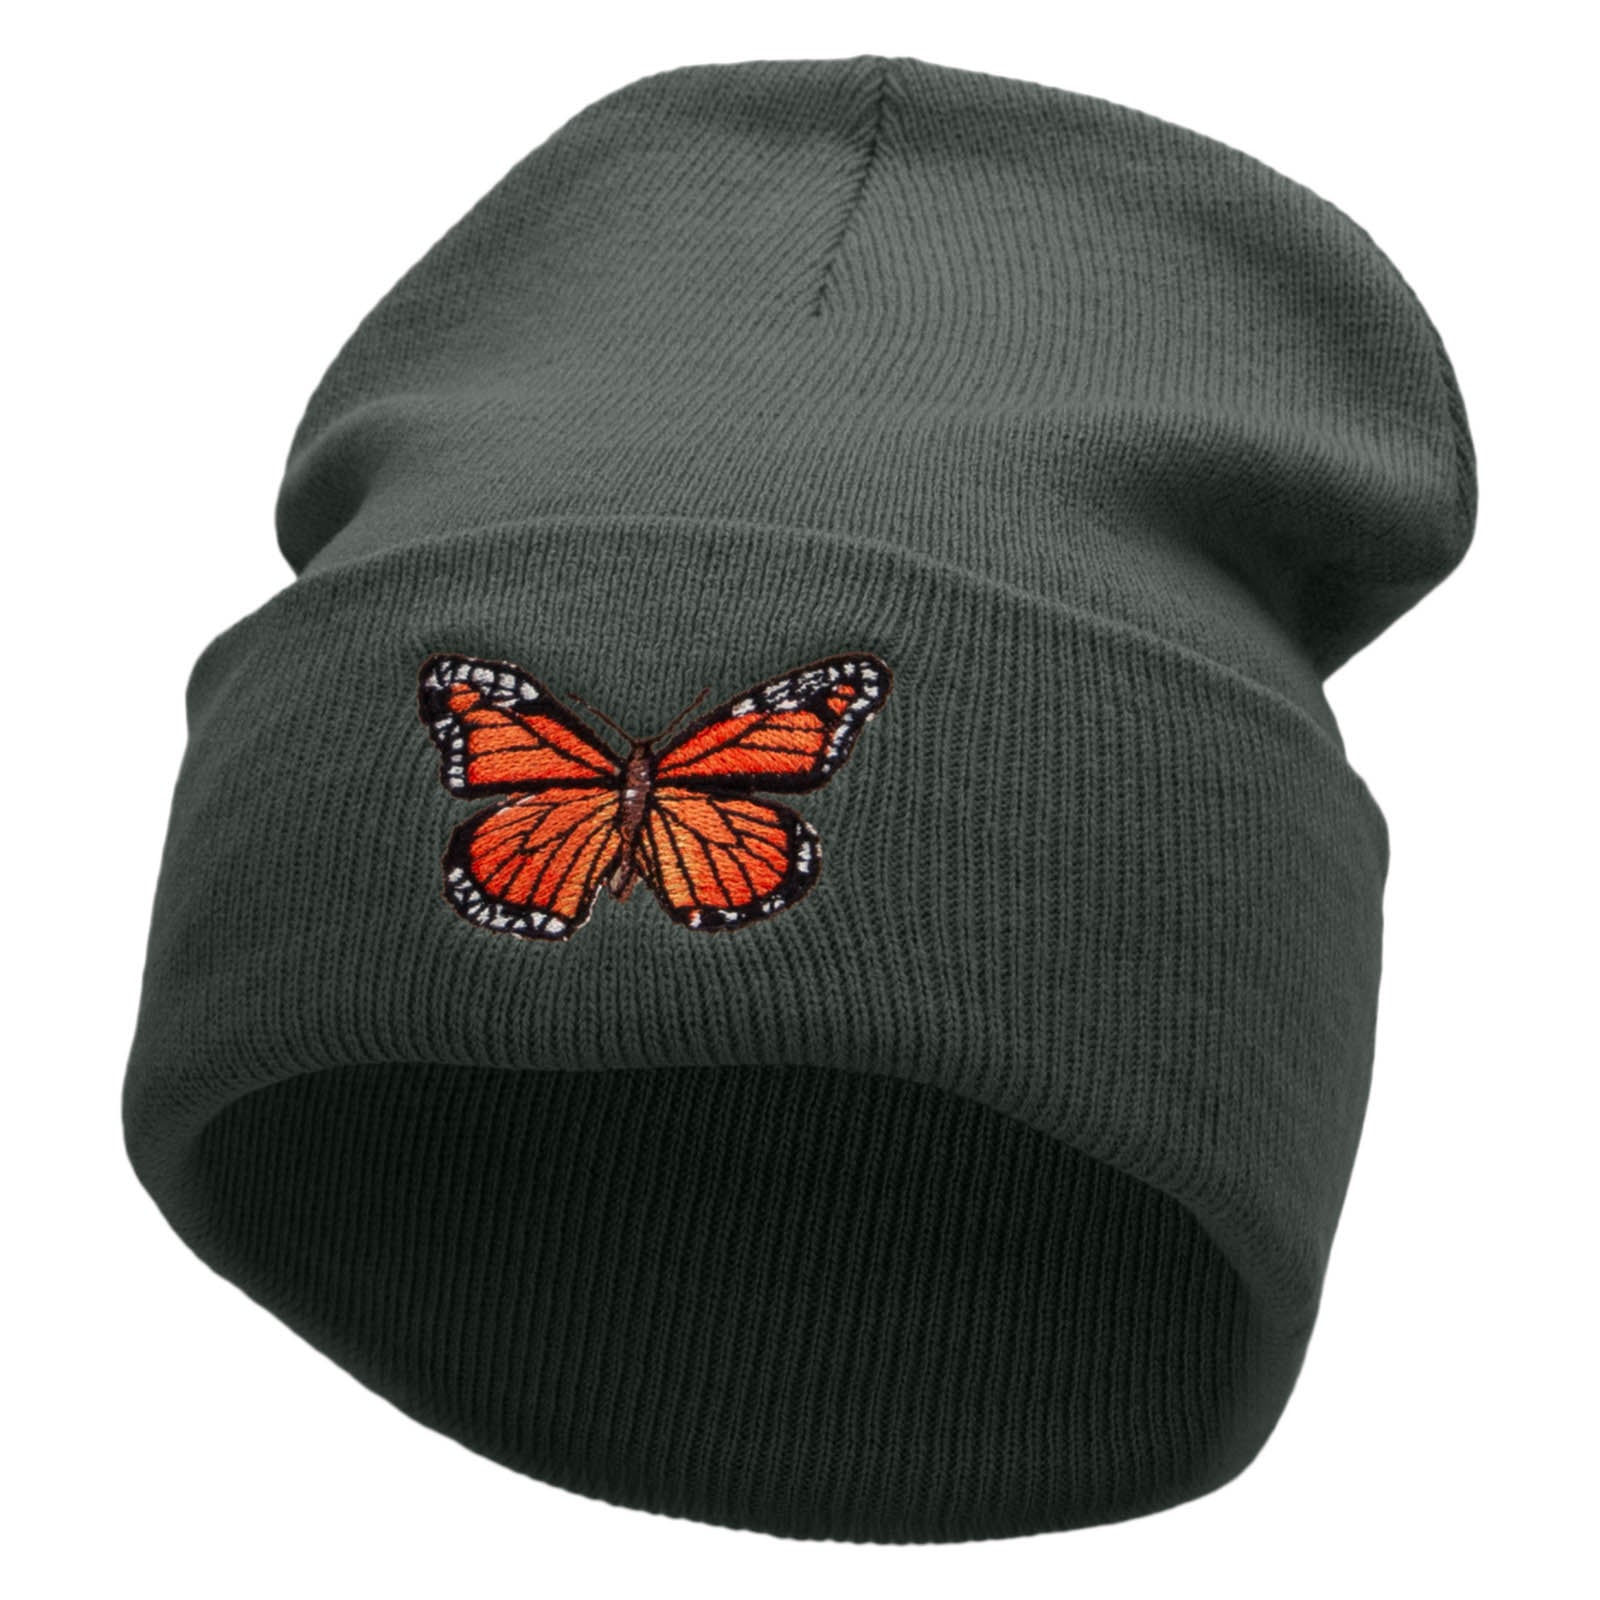 The Monarch Butterfly Embroidered 12 inch Acrylic Cuffed Long Beanie - Charcoal OSFM